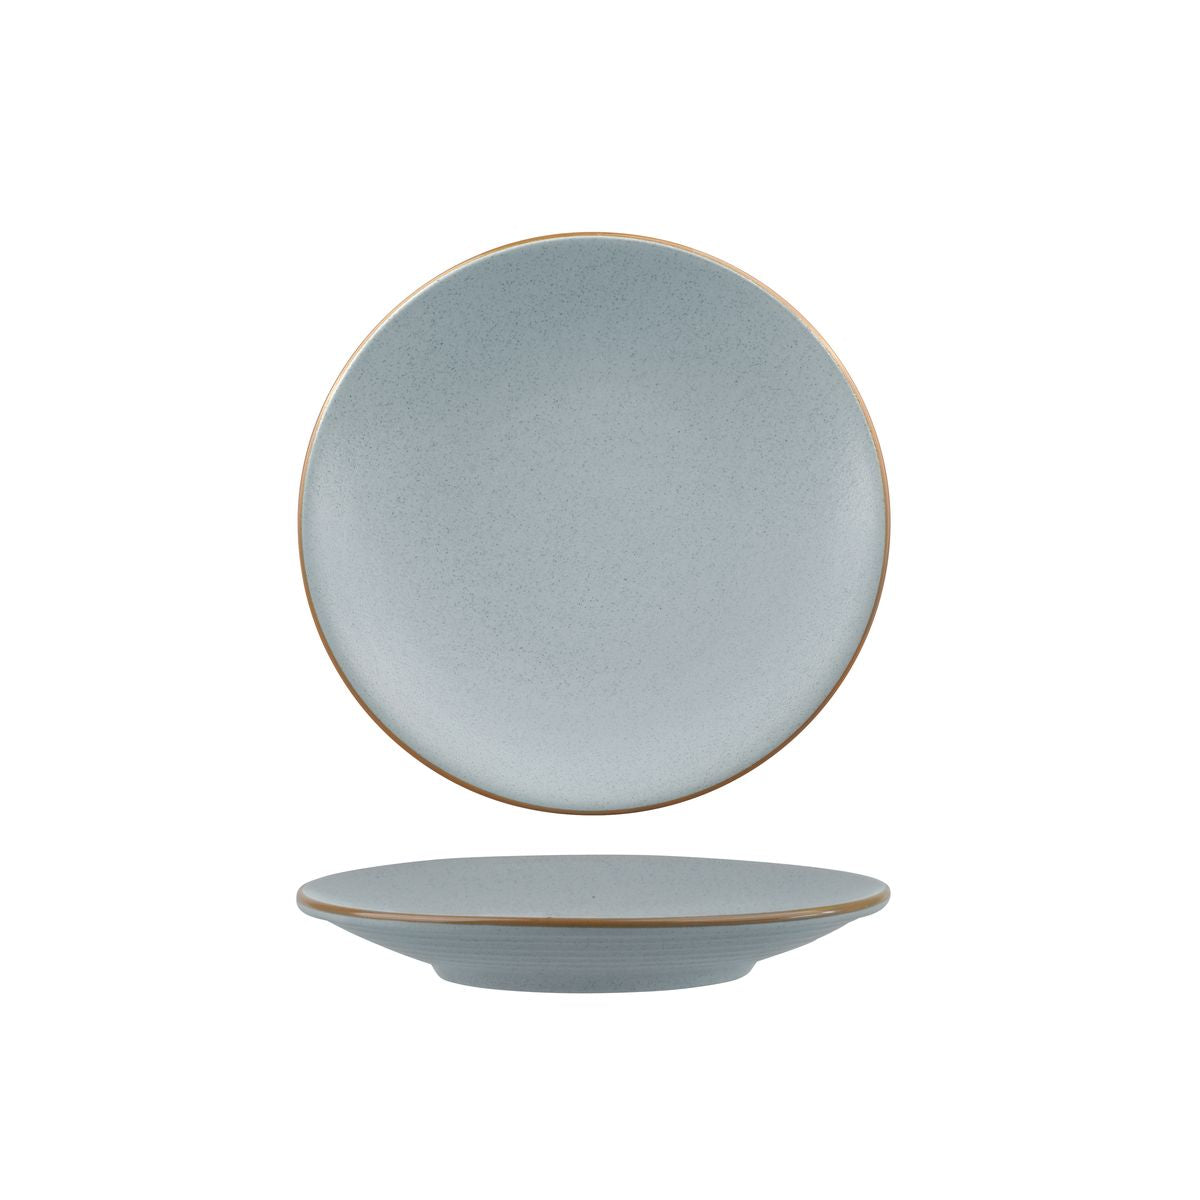 Tapas Plate - 180mm, Zuma Bluestone from Zuma. Matt Finish, made out of Ceramic and sold in boxes of 6. Hospitality quality at wholesale price with The Flying Fork! 